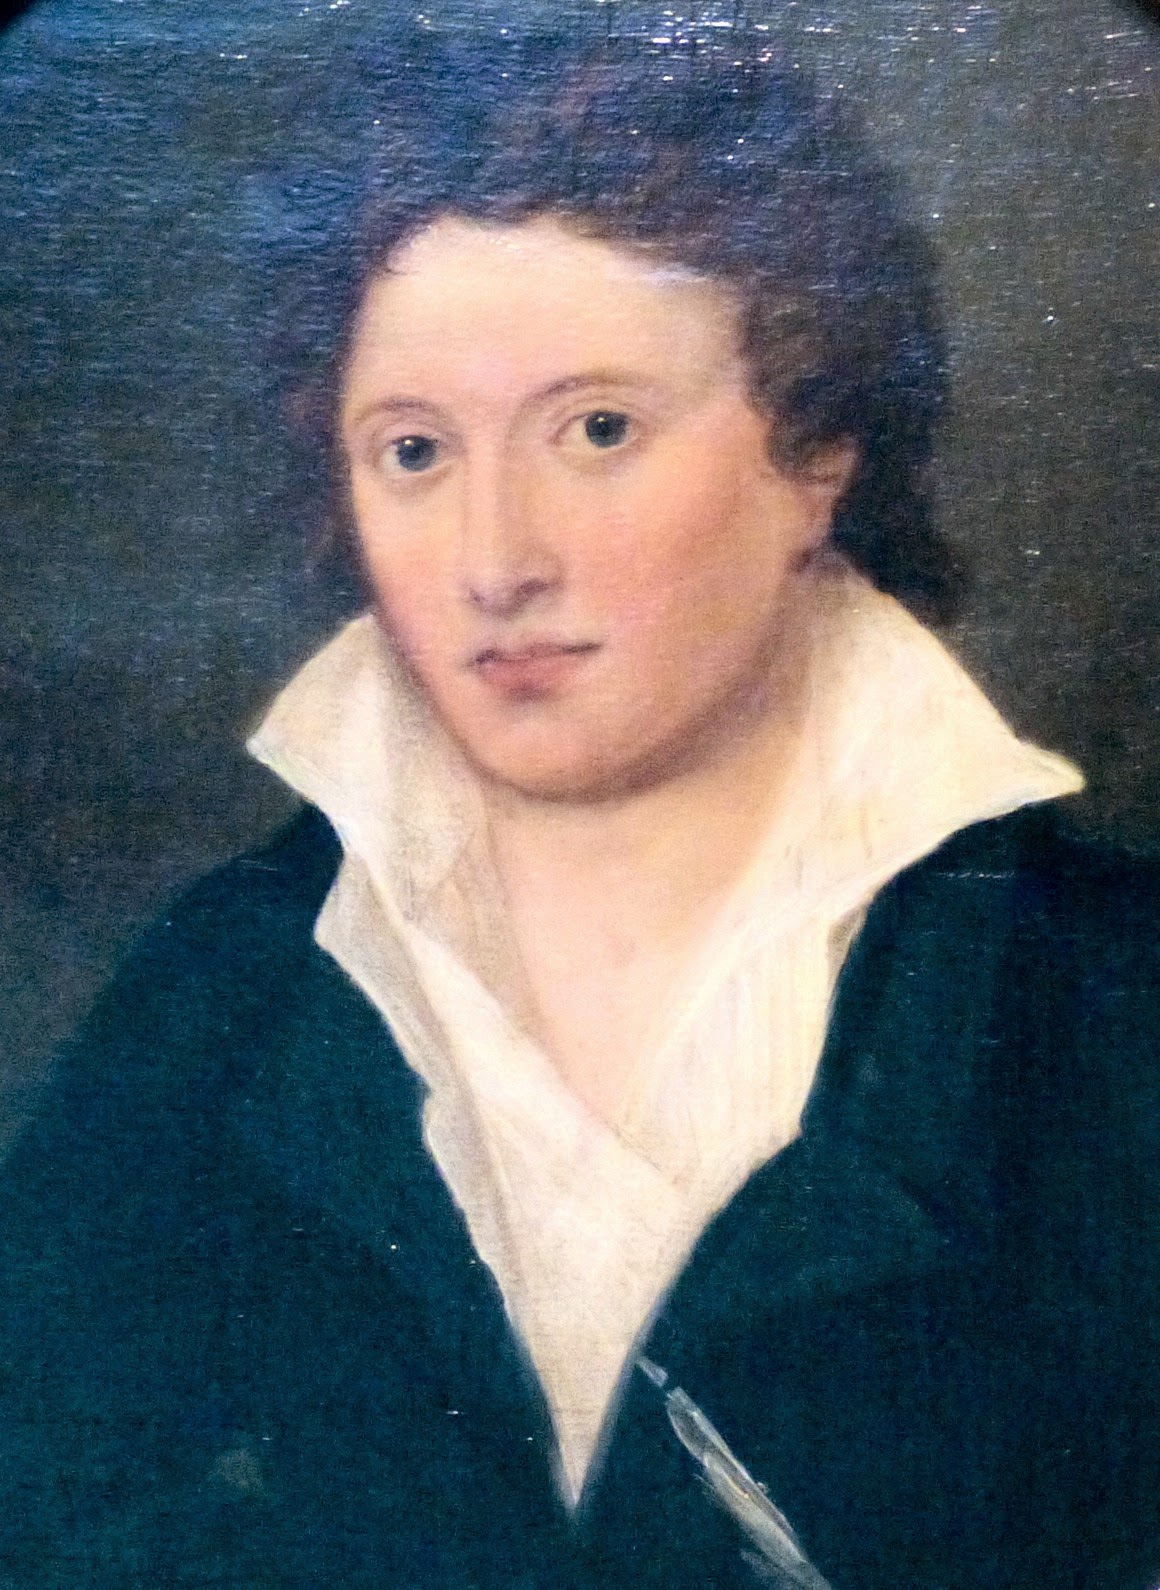 Percy Bysshe Shelley  by Amelia Curran (1819)  at the National Portrait Gallery, London